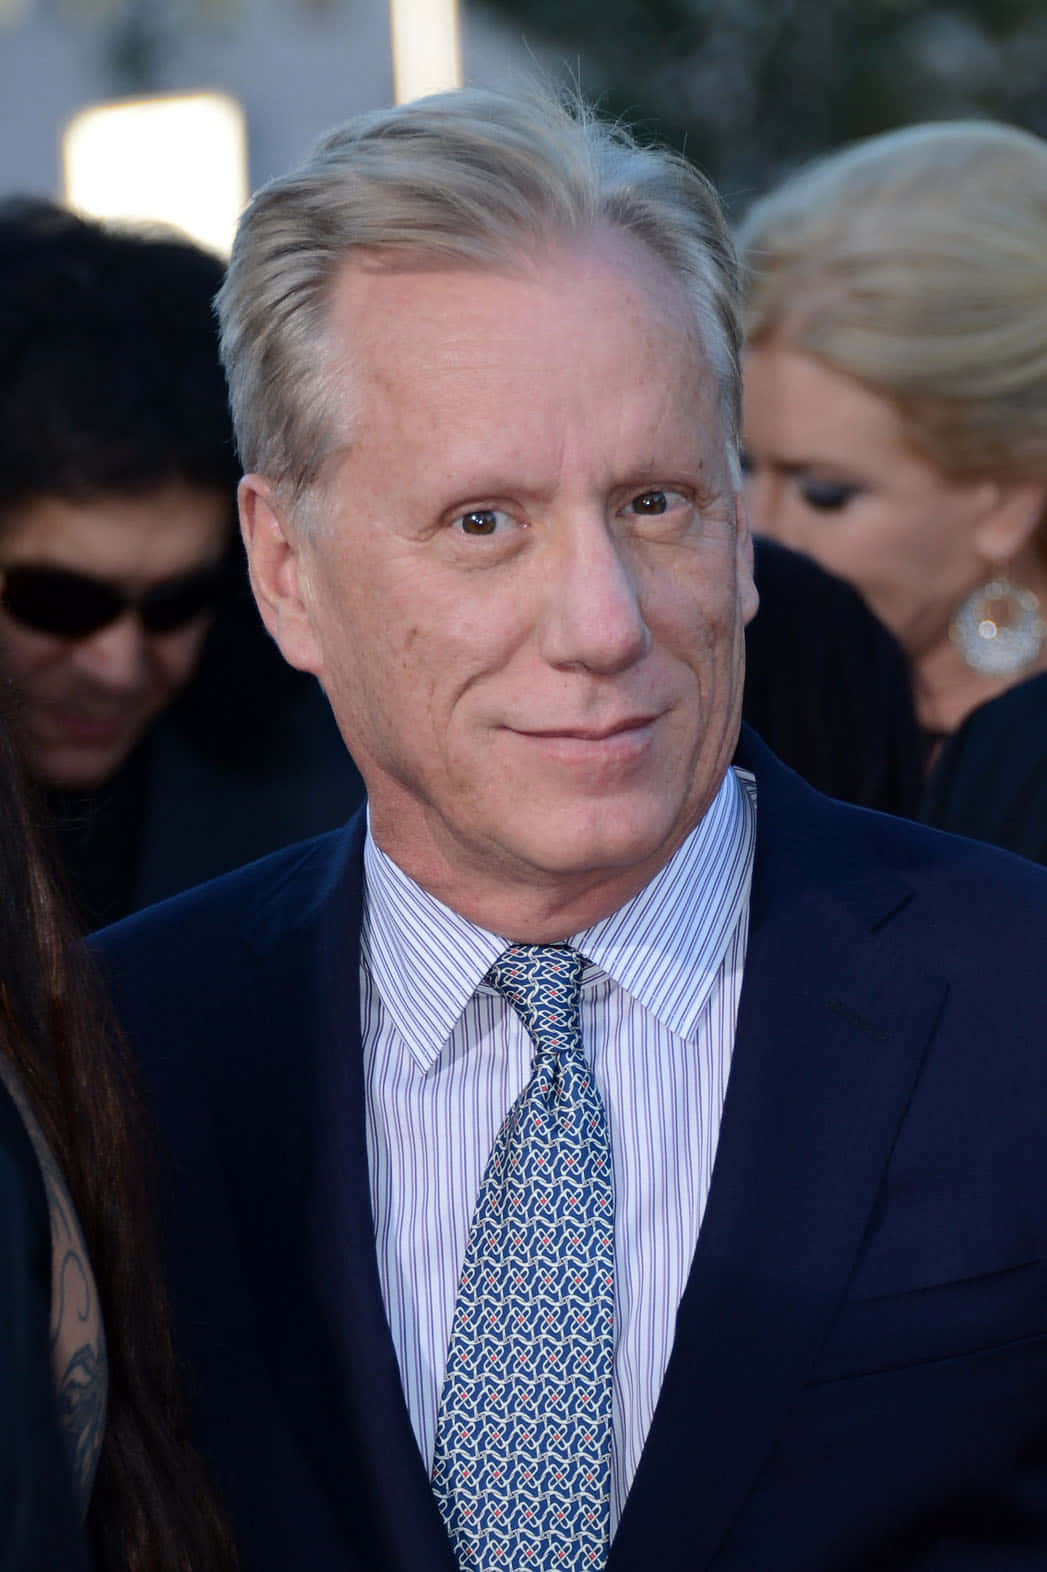 Jameswoods Is An American Actor And Producer. He Is Known For His Roles In Films Such As 